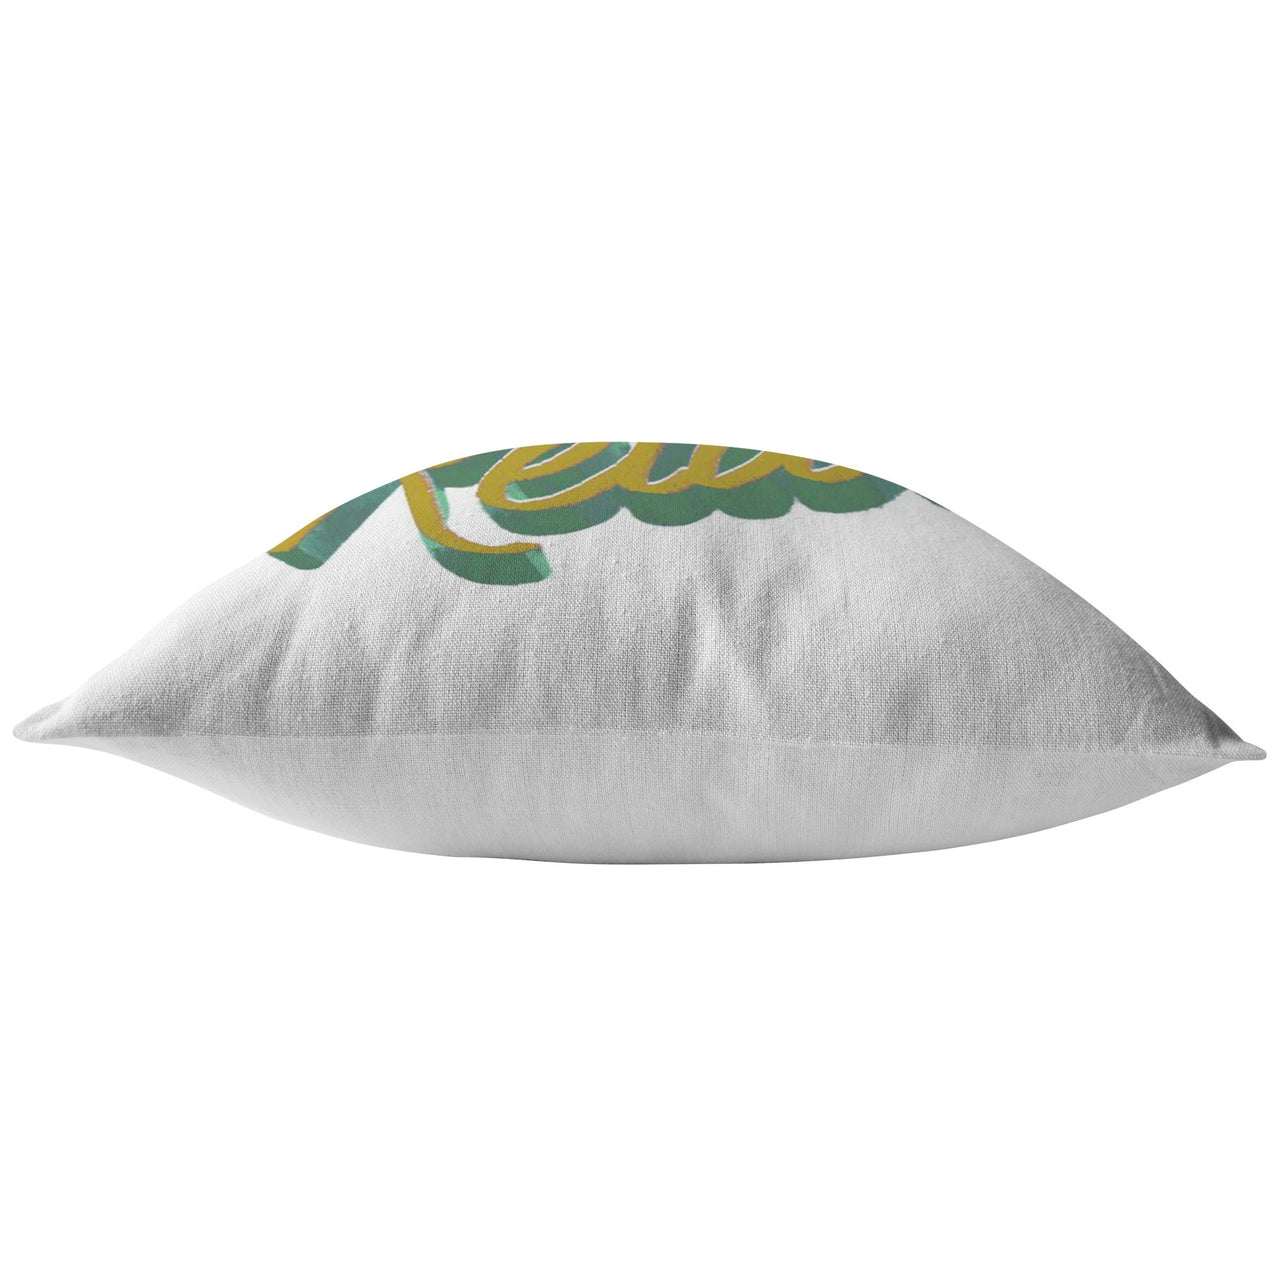 The Relax Pillow